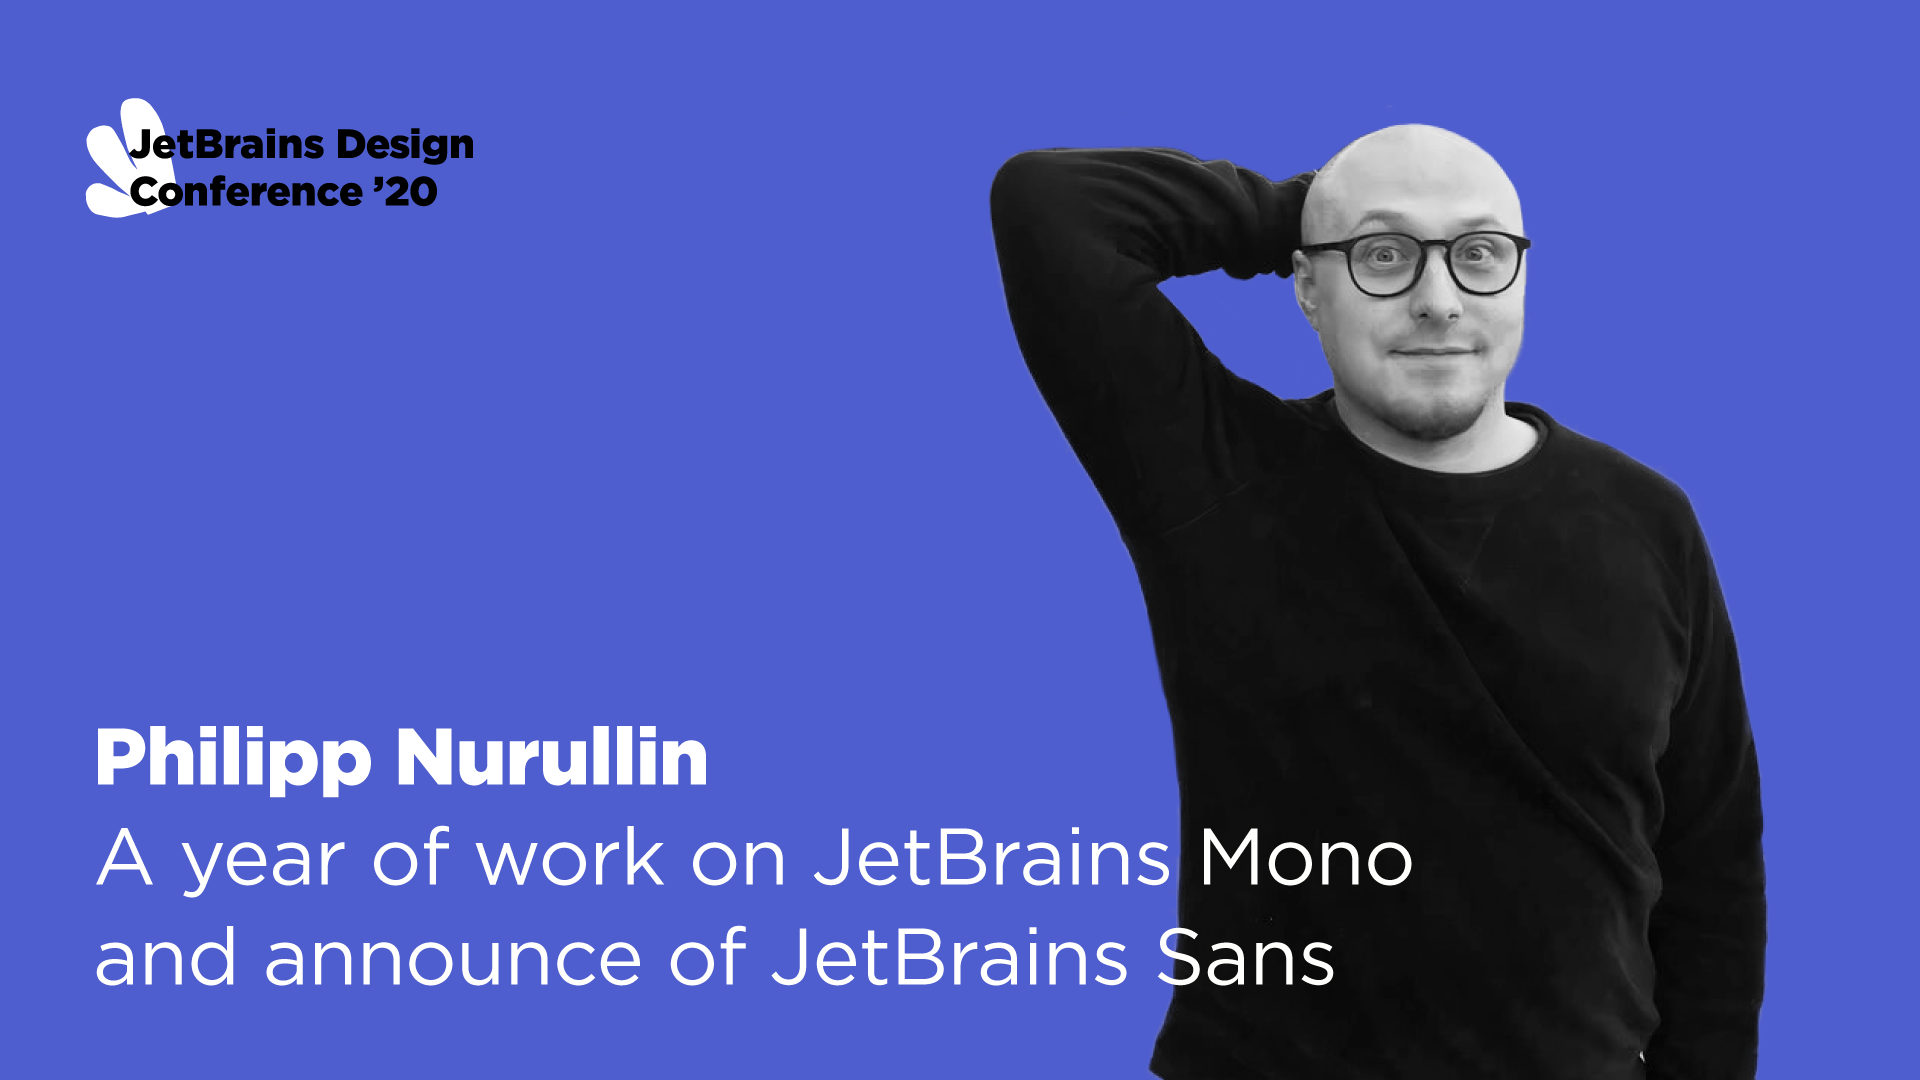 A Year of Work on JetBrains Mono and Announce of JetBrains Sans